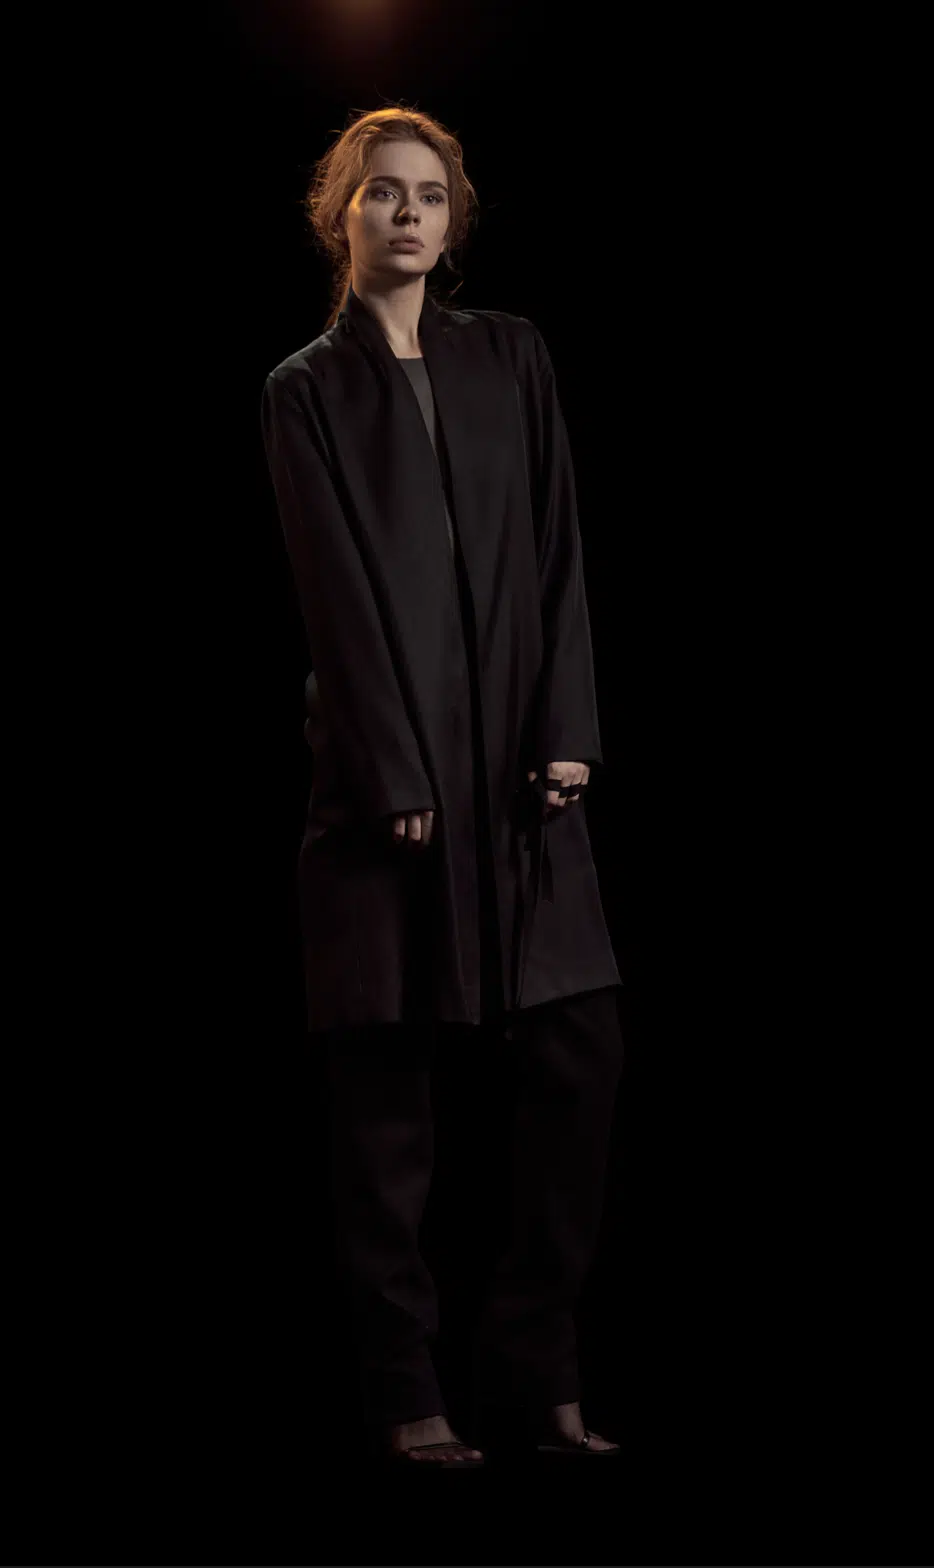 Image from FW16 Collection